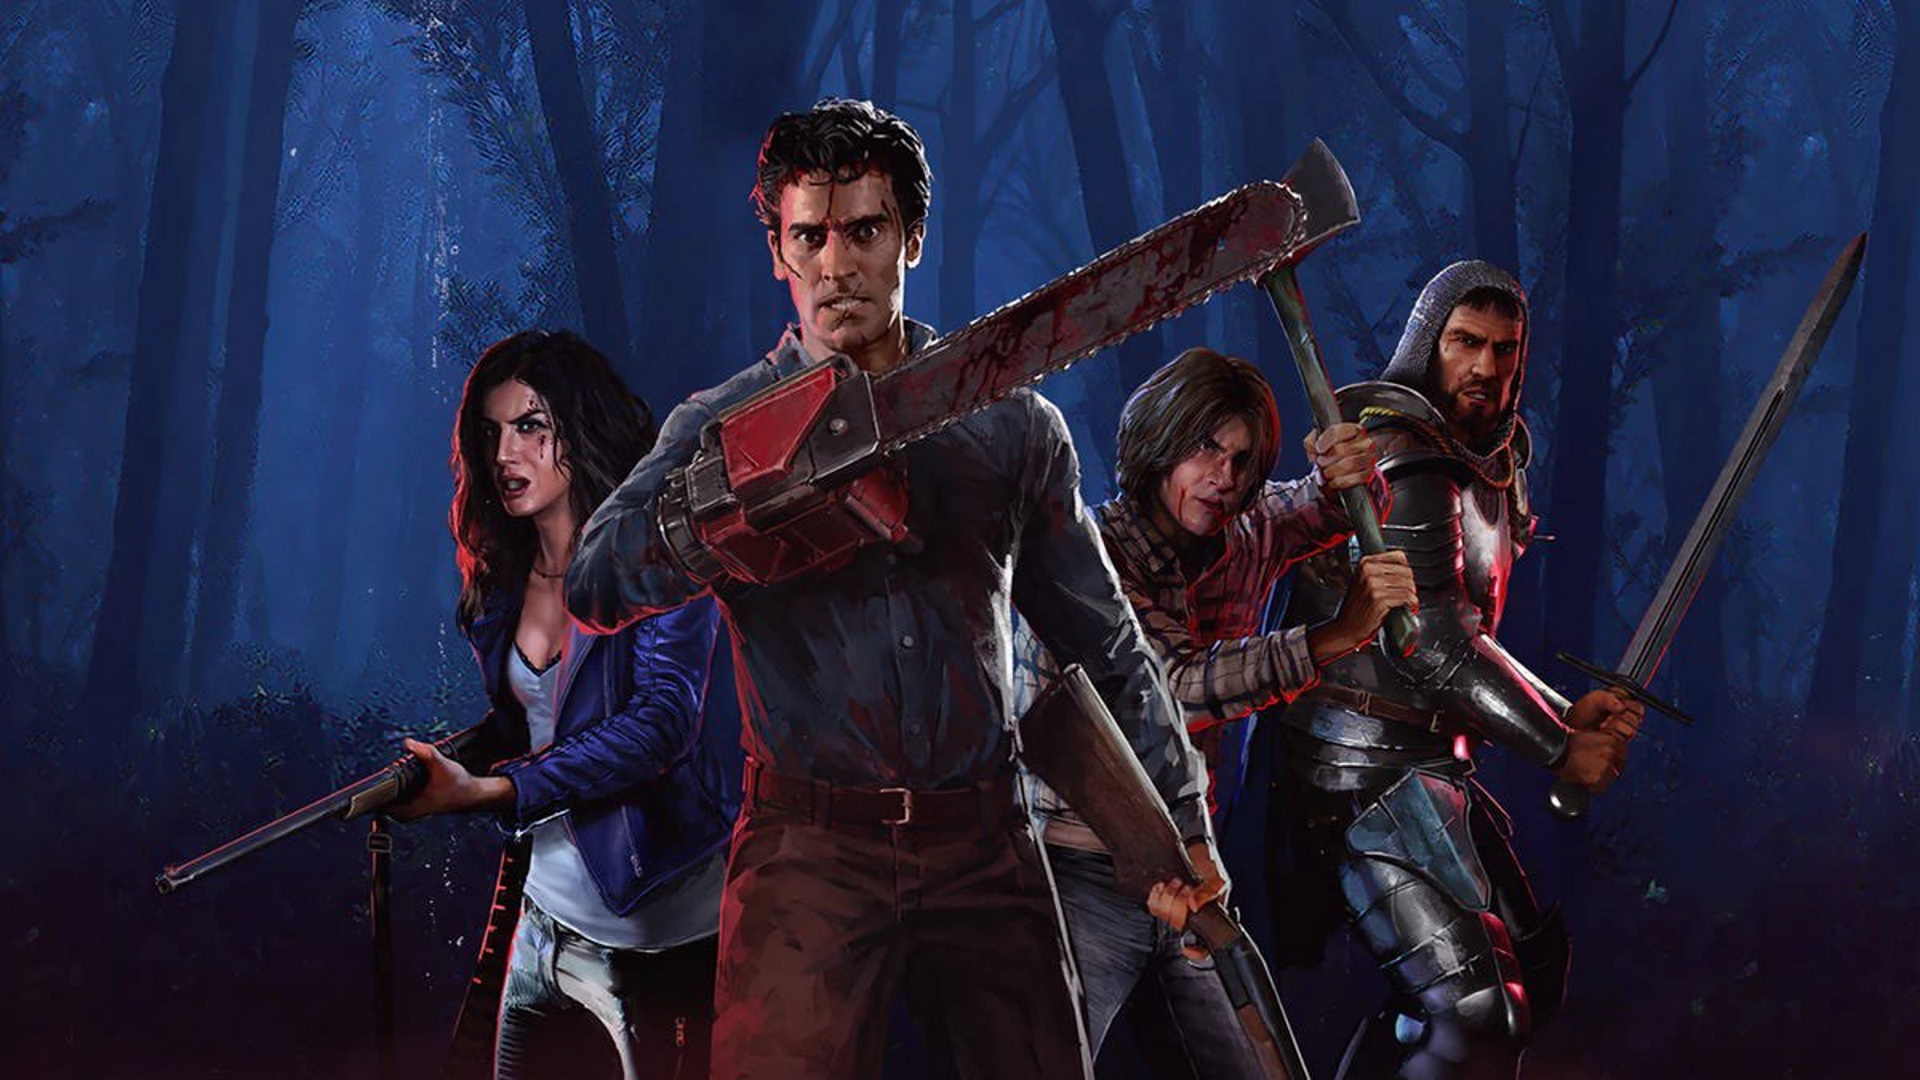 Evil Dead: The Game multiplayer - Ash and other characters pose in creepy woods